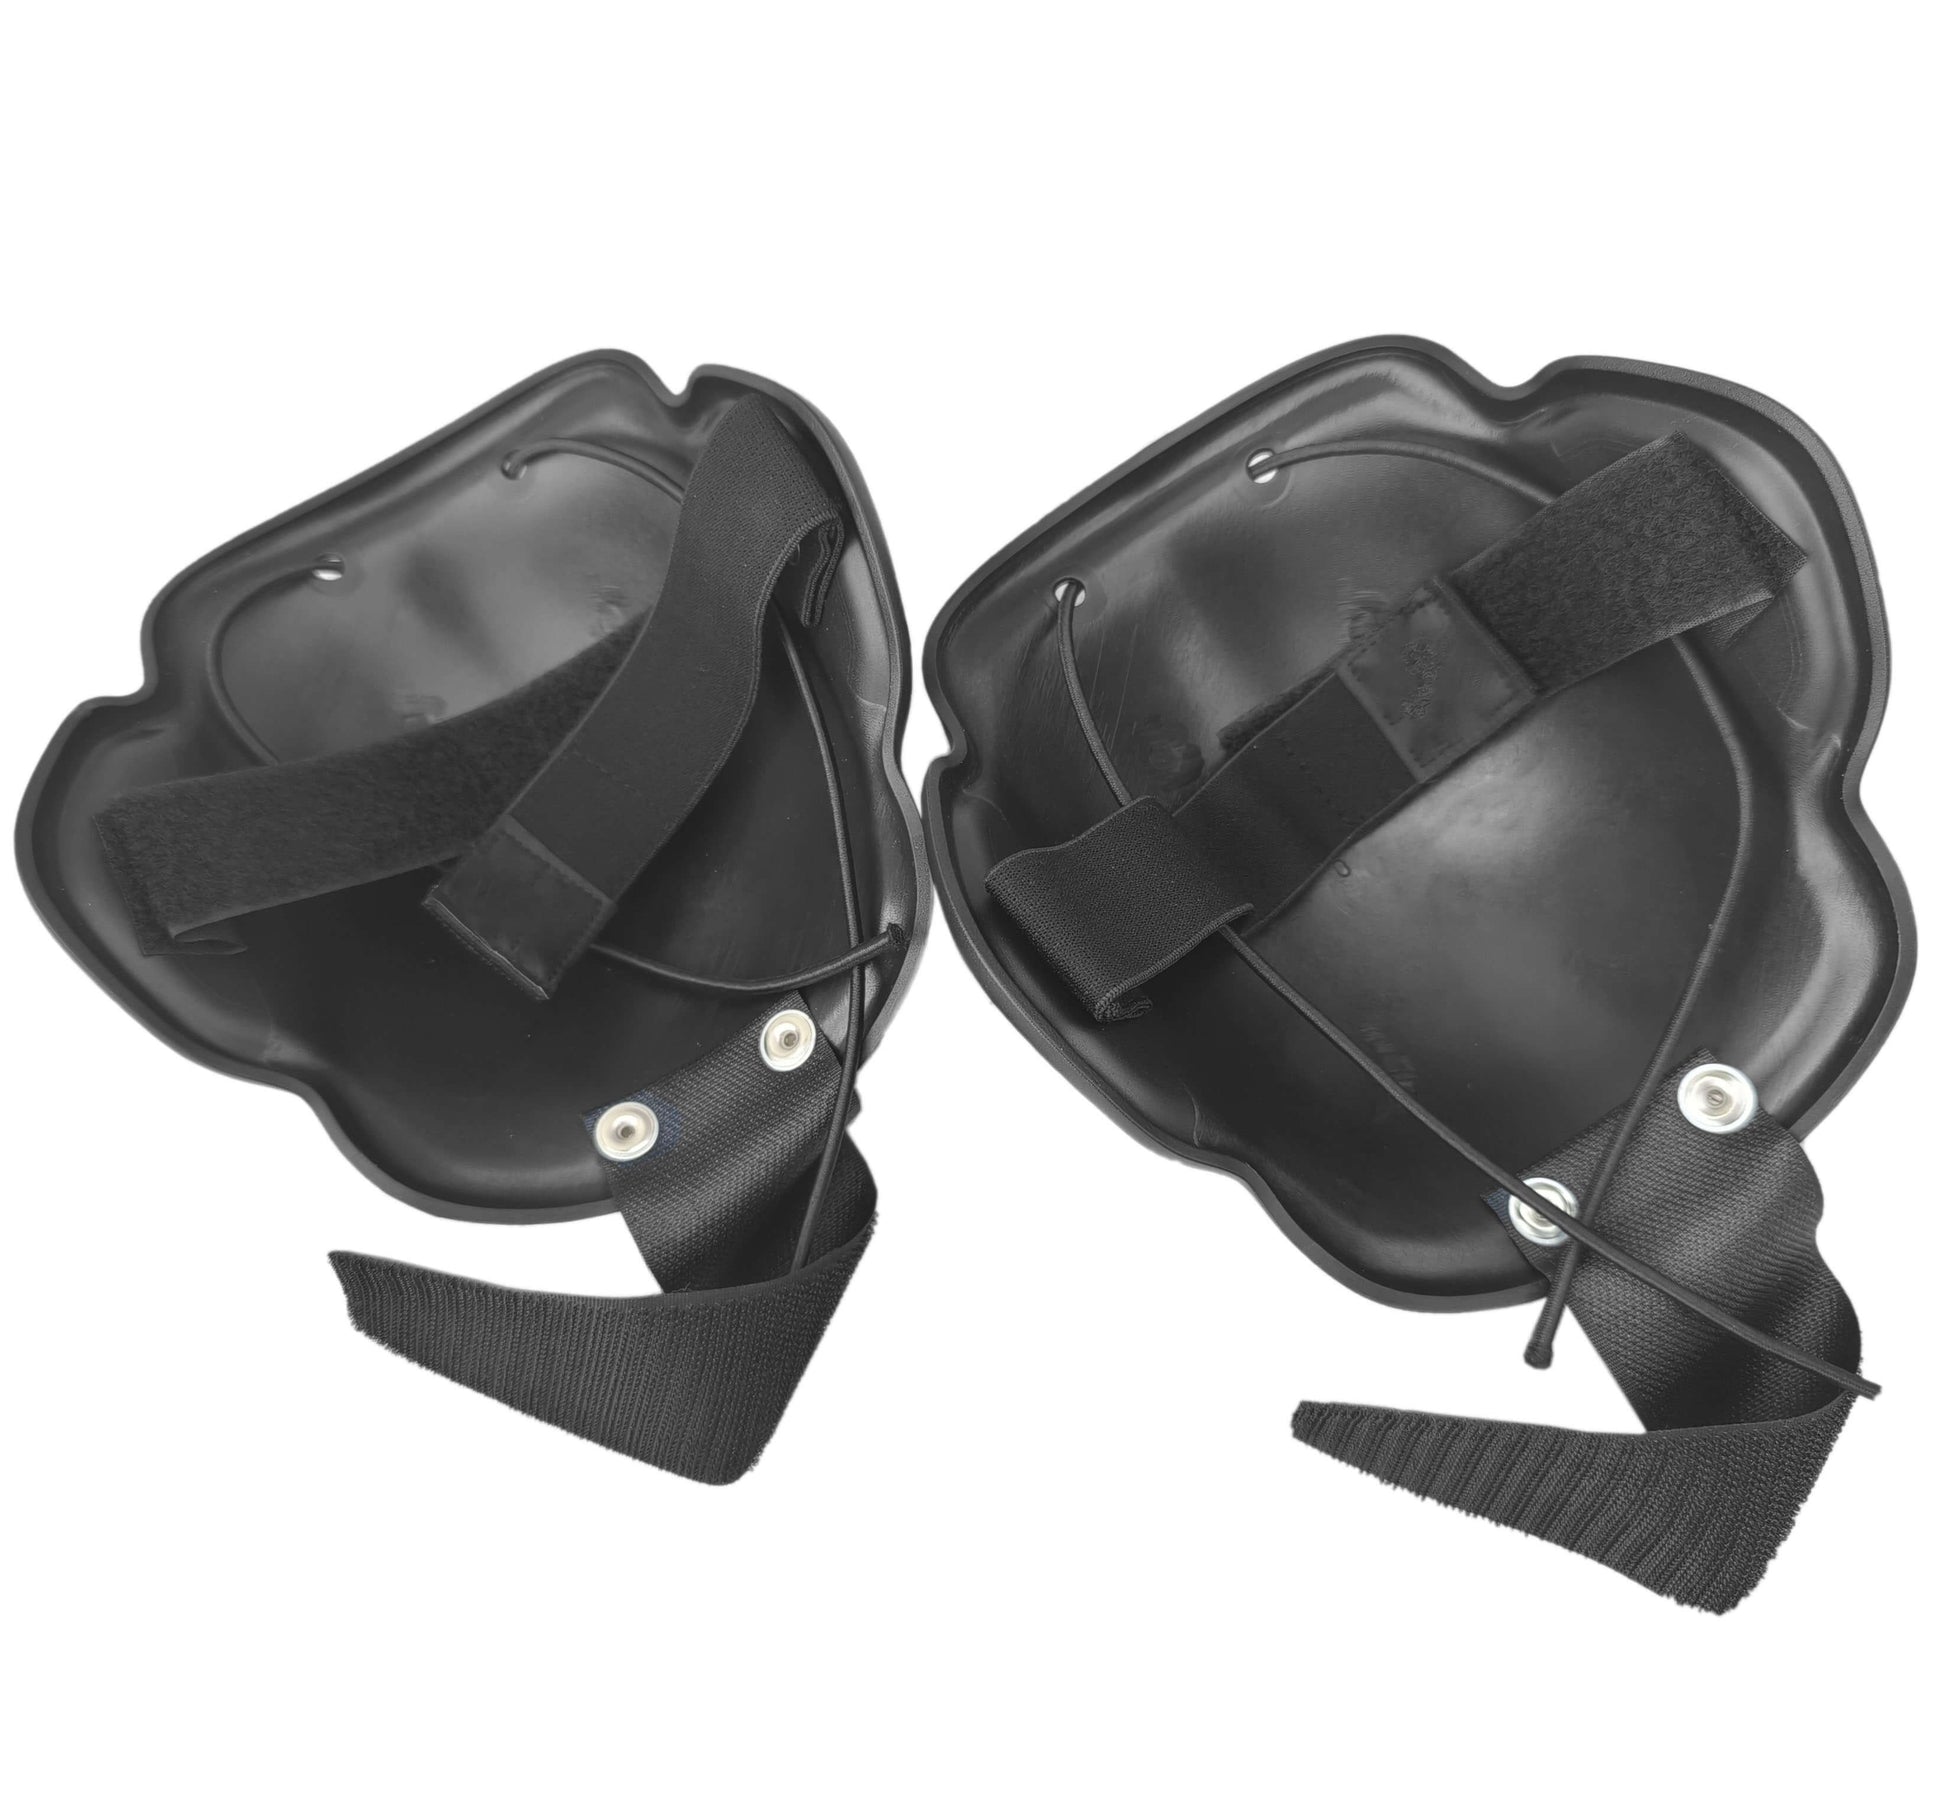 Tactical elbow pads - Elbow pads for HEMA